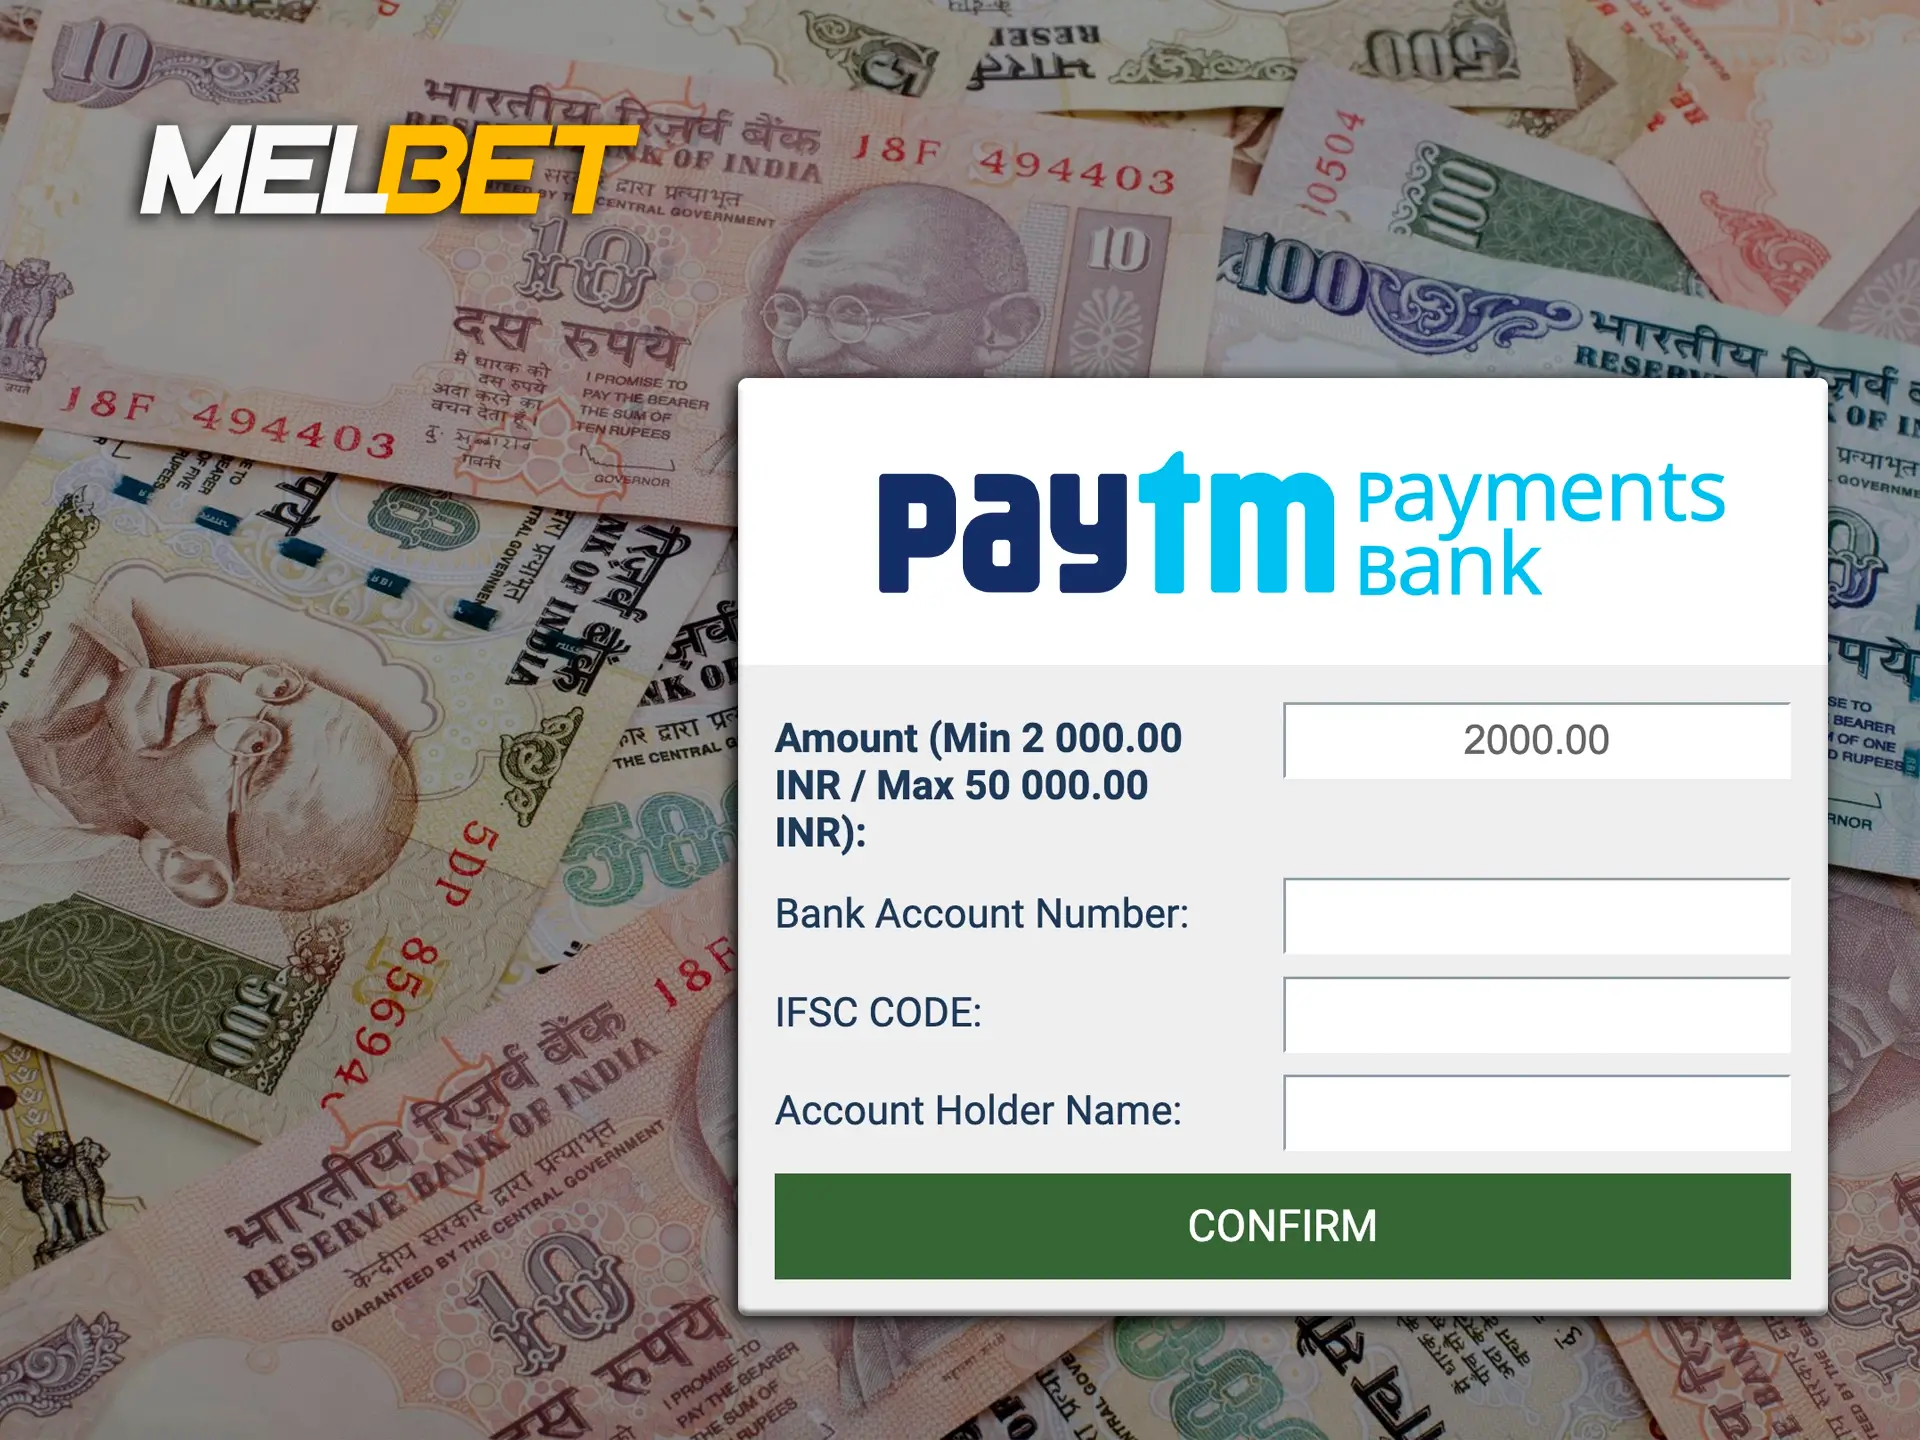 PayTm and Melbet have been co-operating for a long time and allow their customers to withdraw their funds without any problems.